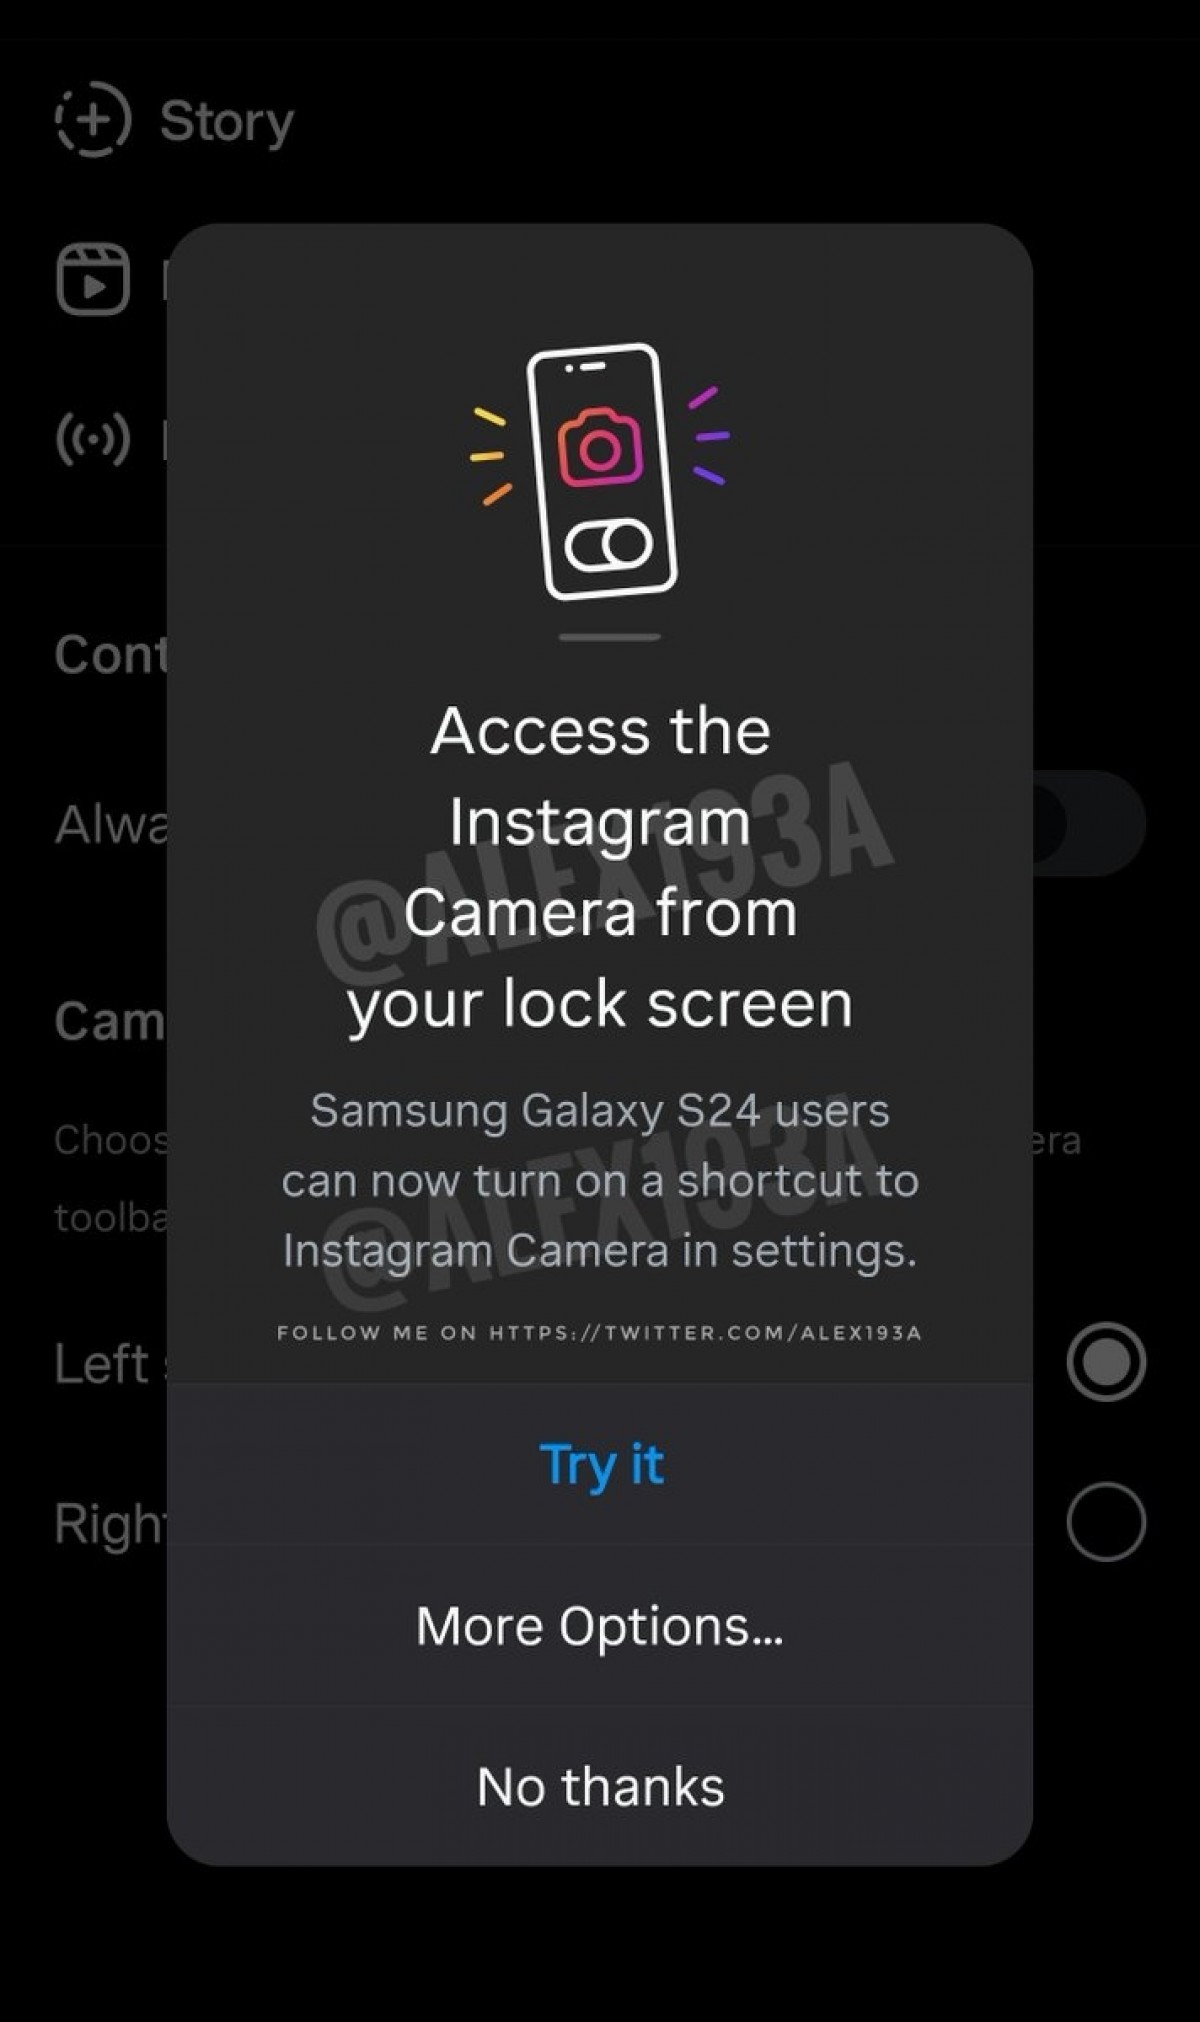 Samsung Galaxy S24 users might be able to open Instagram's camera from lock screen